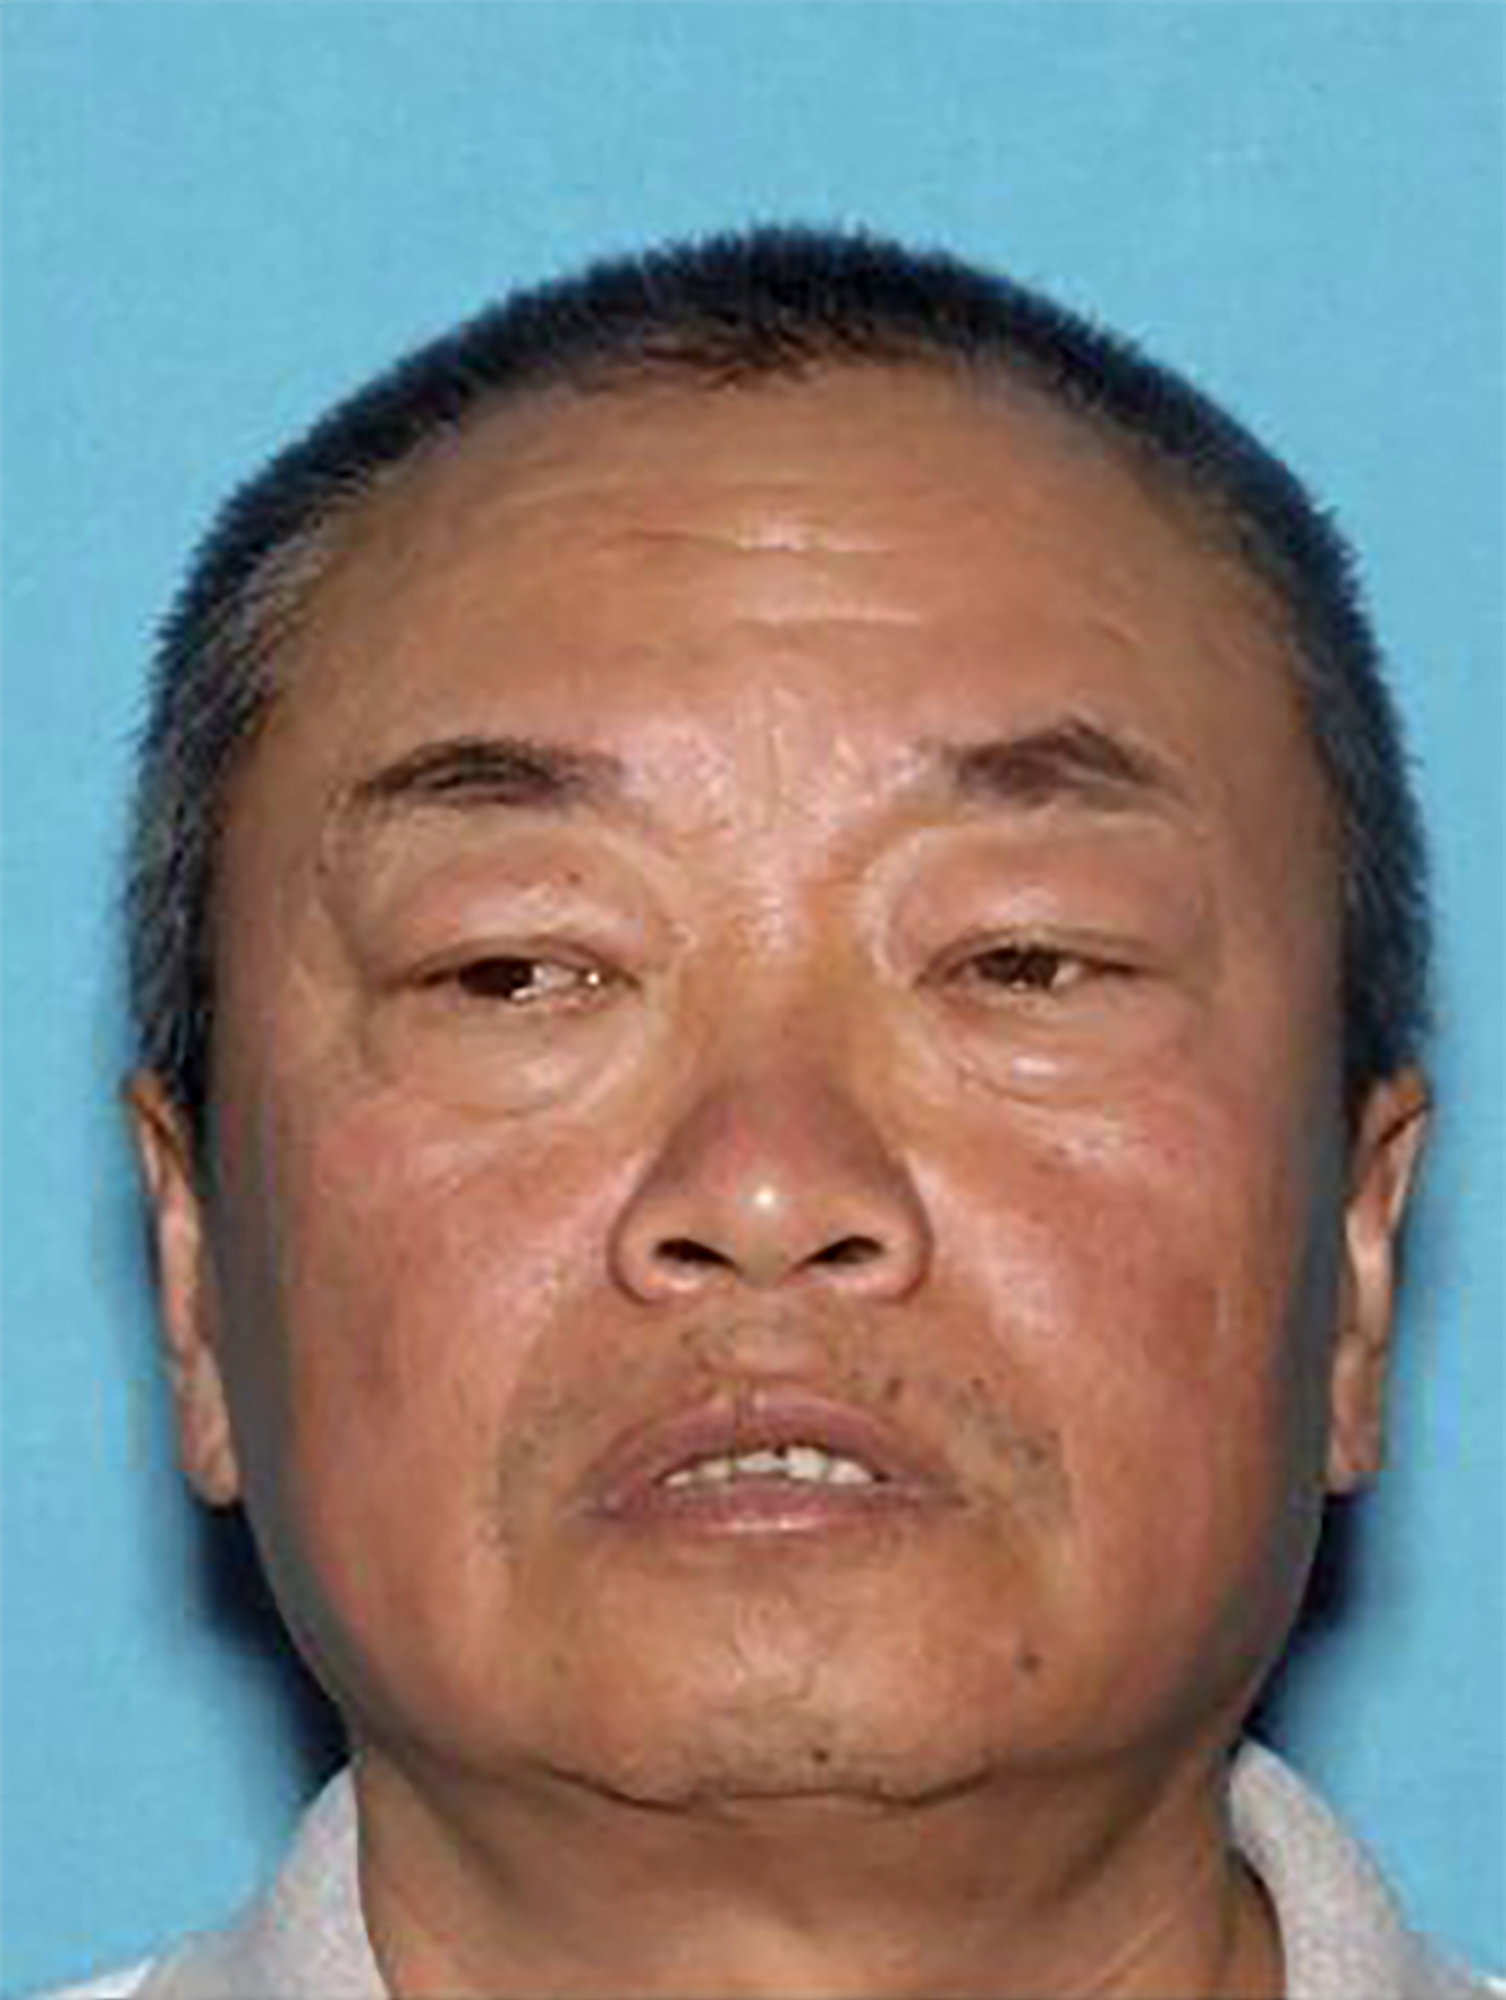 PHOTO: This undated photo provided by the San Mateo County Sheriff's Department shows Chunli Zhao.